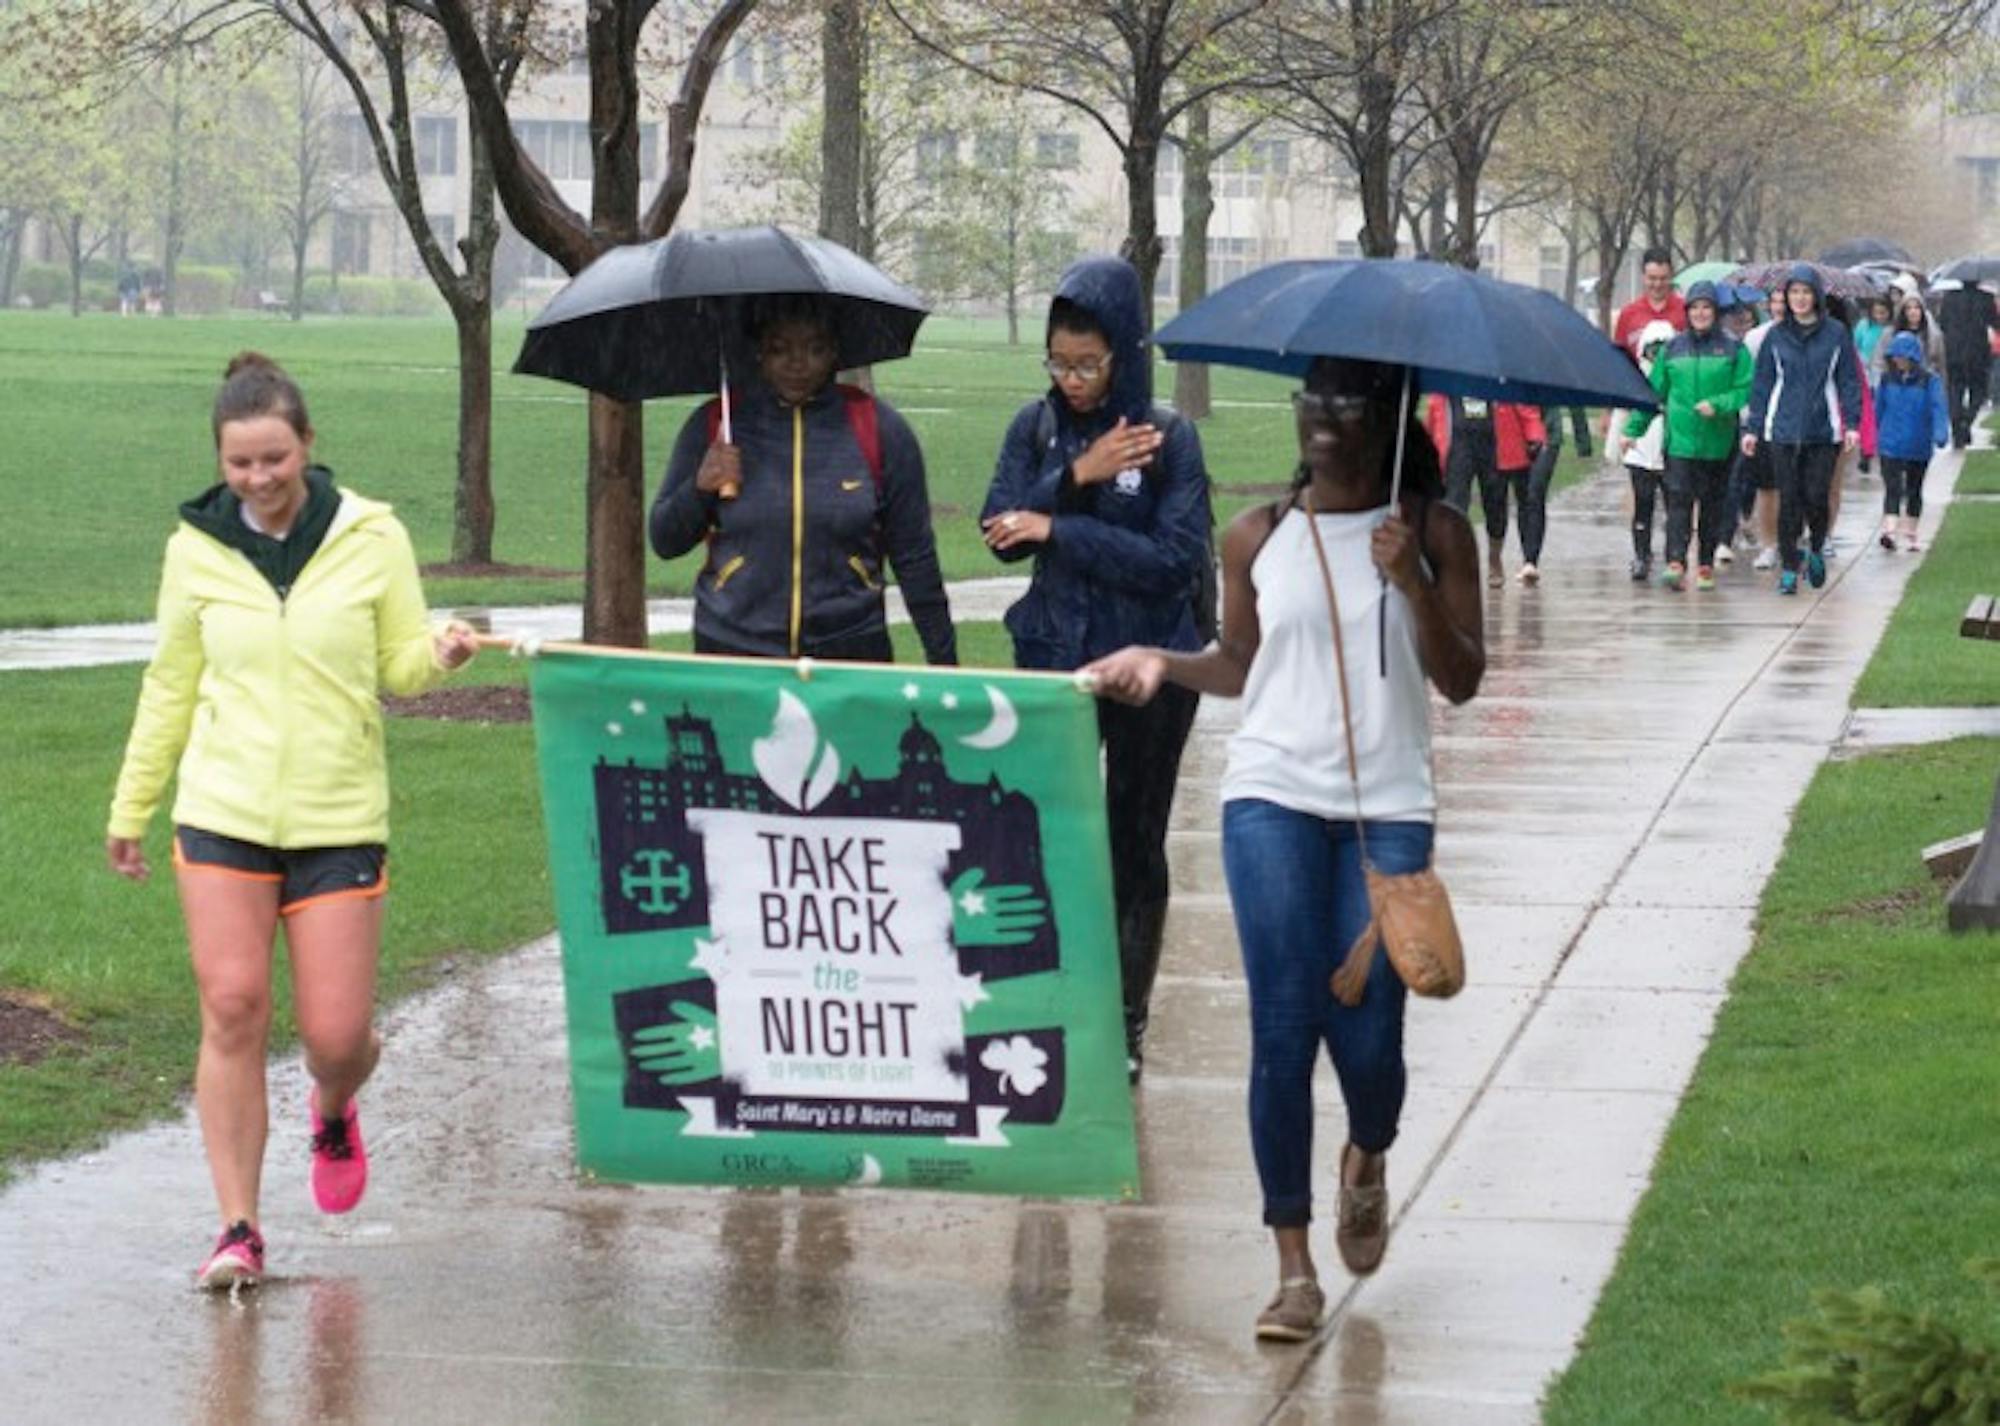 Participants in last year's Take Back the Night event march around campus to raise awareness for issues of sexual assault before ending the night with a prayer vigil at the Grotto.